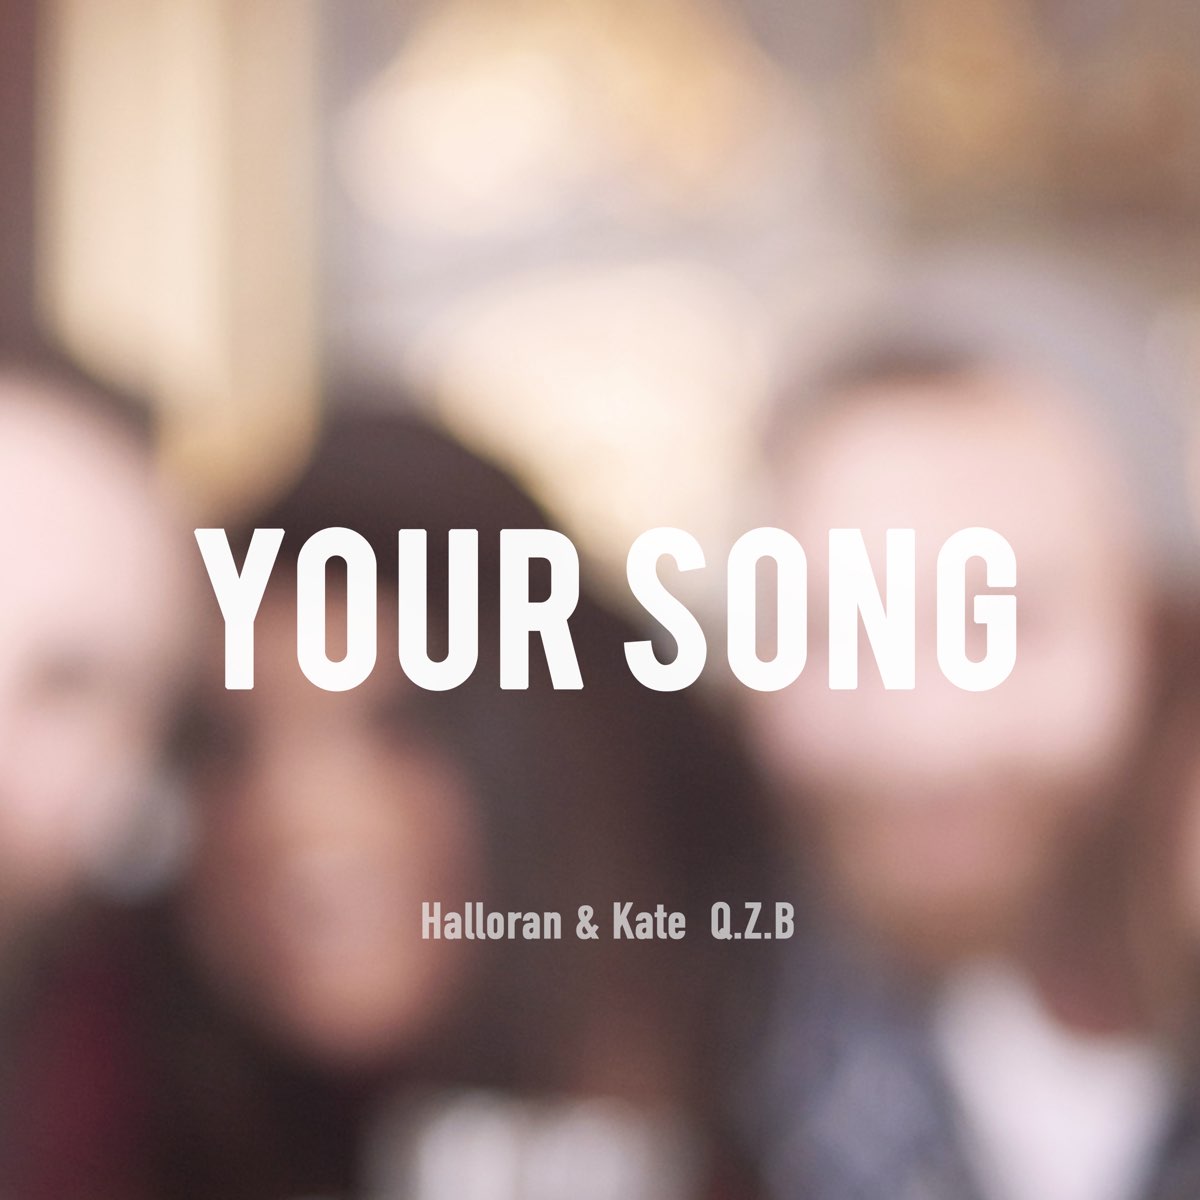 Your Song. Kate_yours. Kate перевод. This your песня